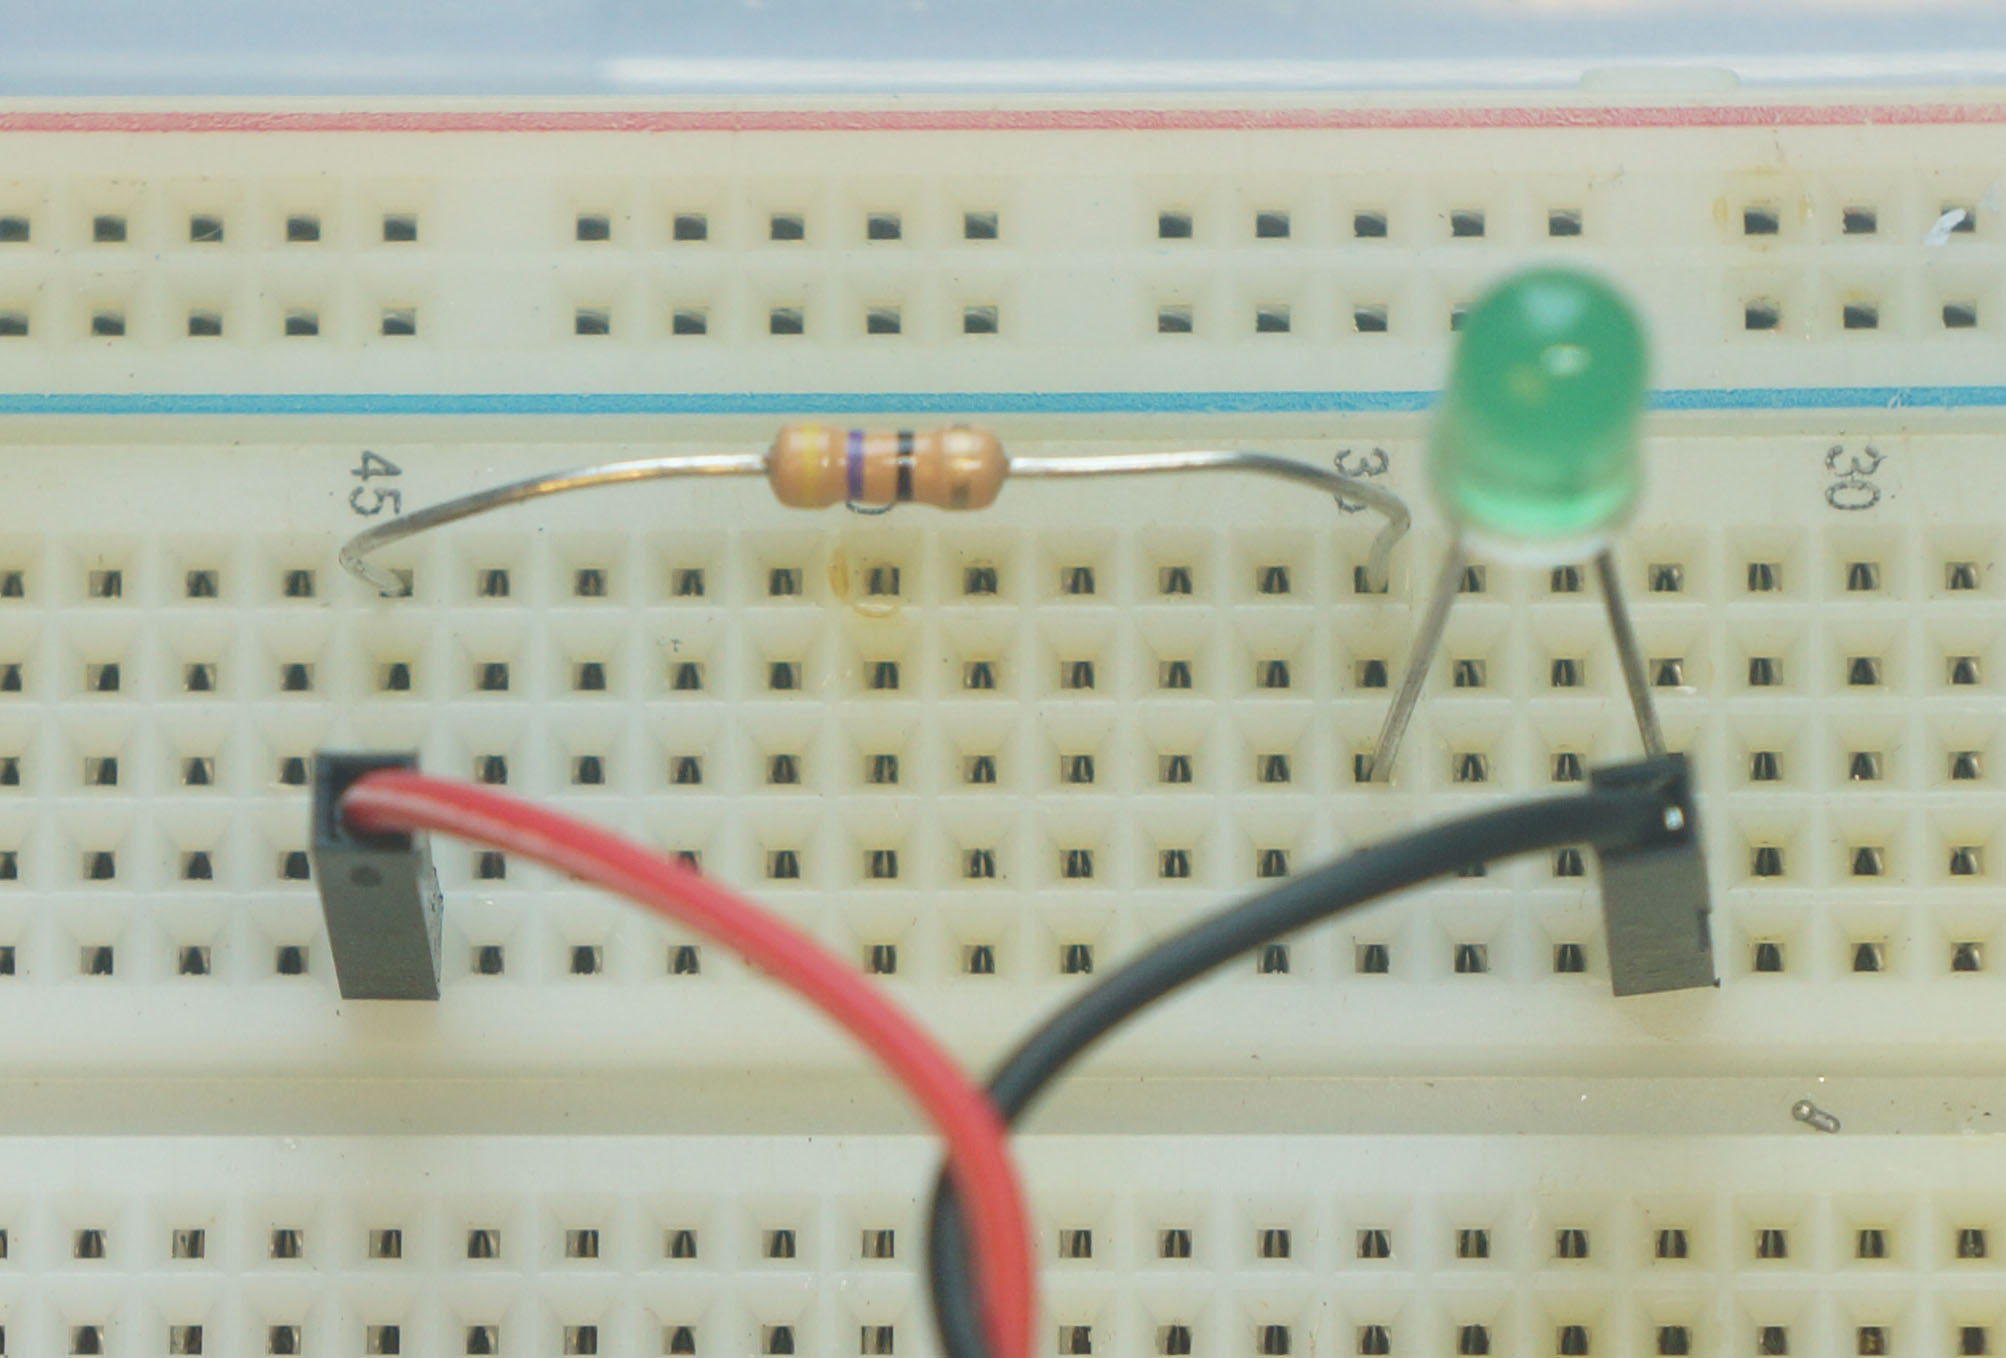 Connect an LED to Ox64 SBC at GPIO 29, Pin 21